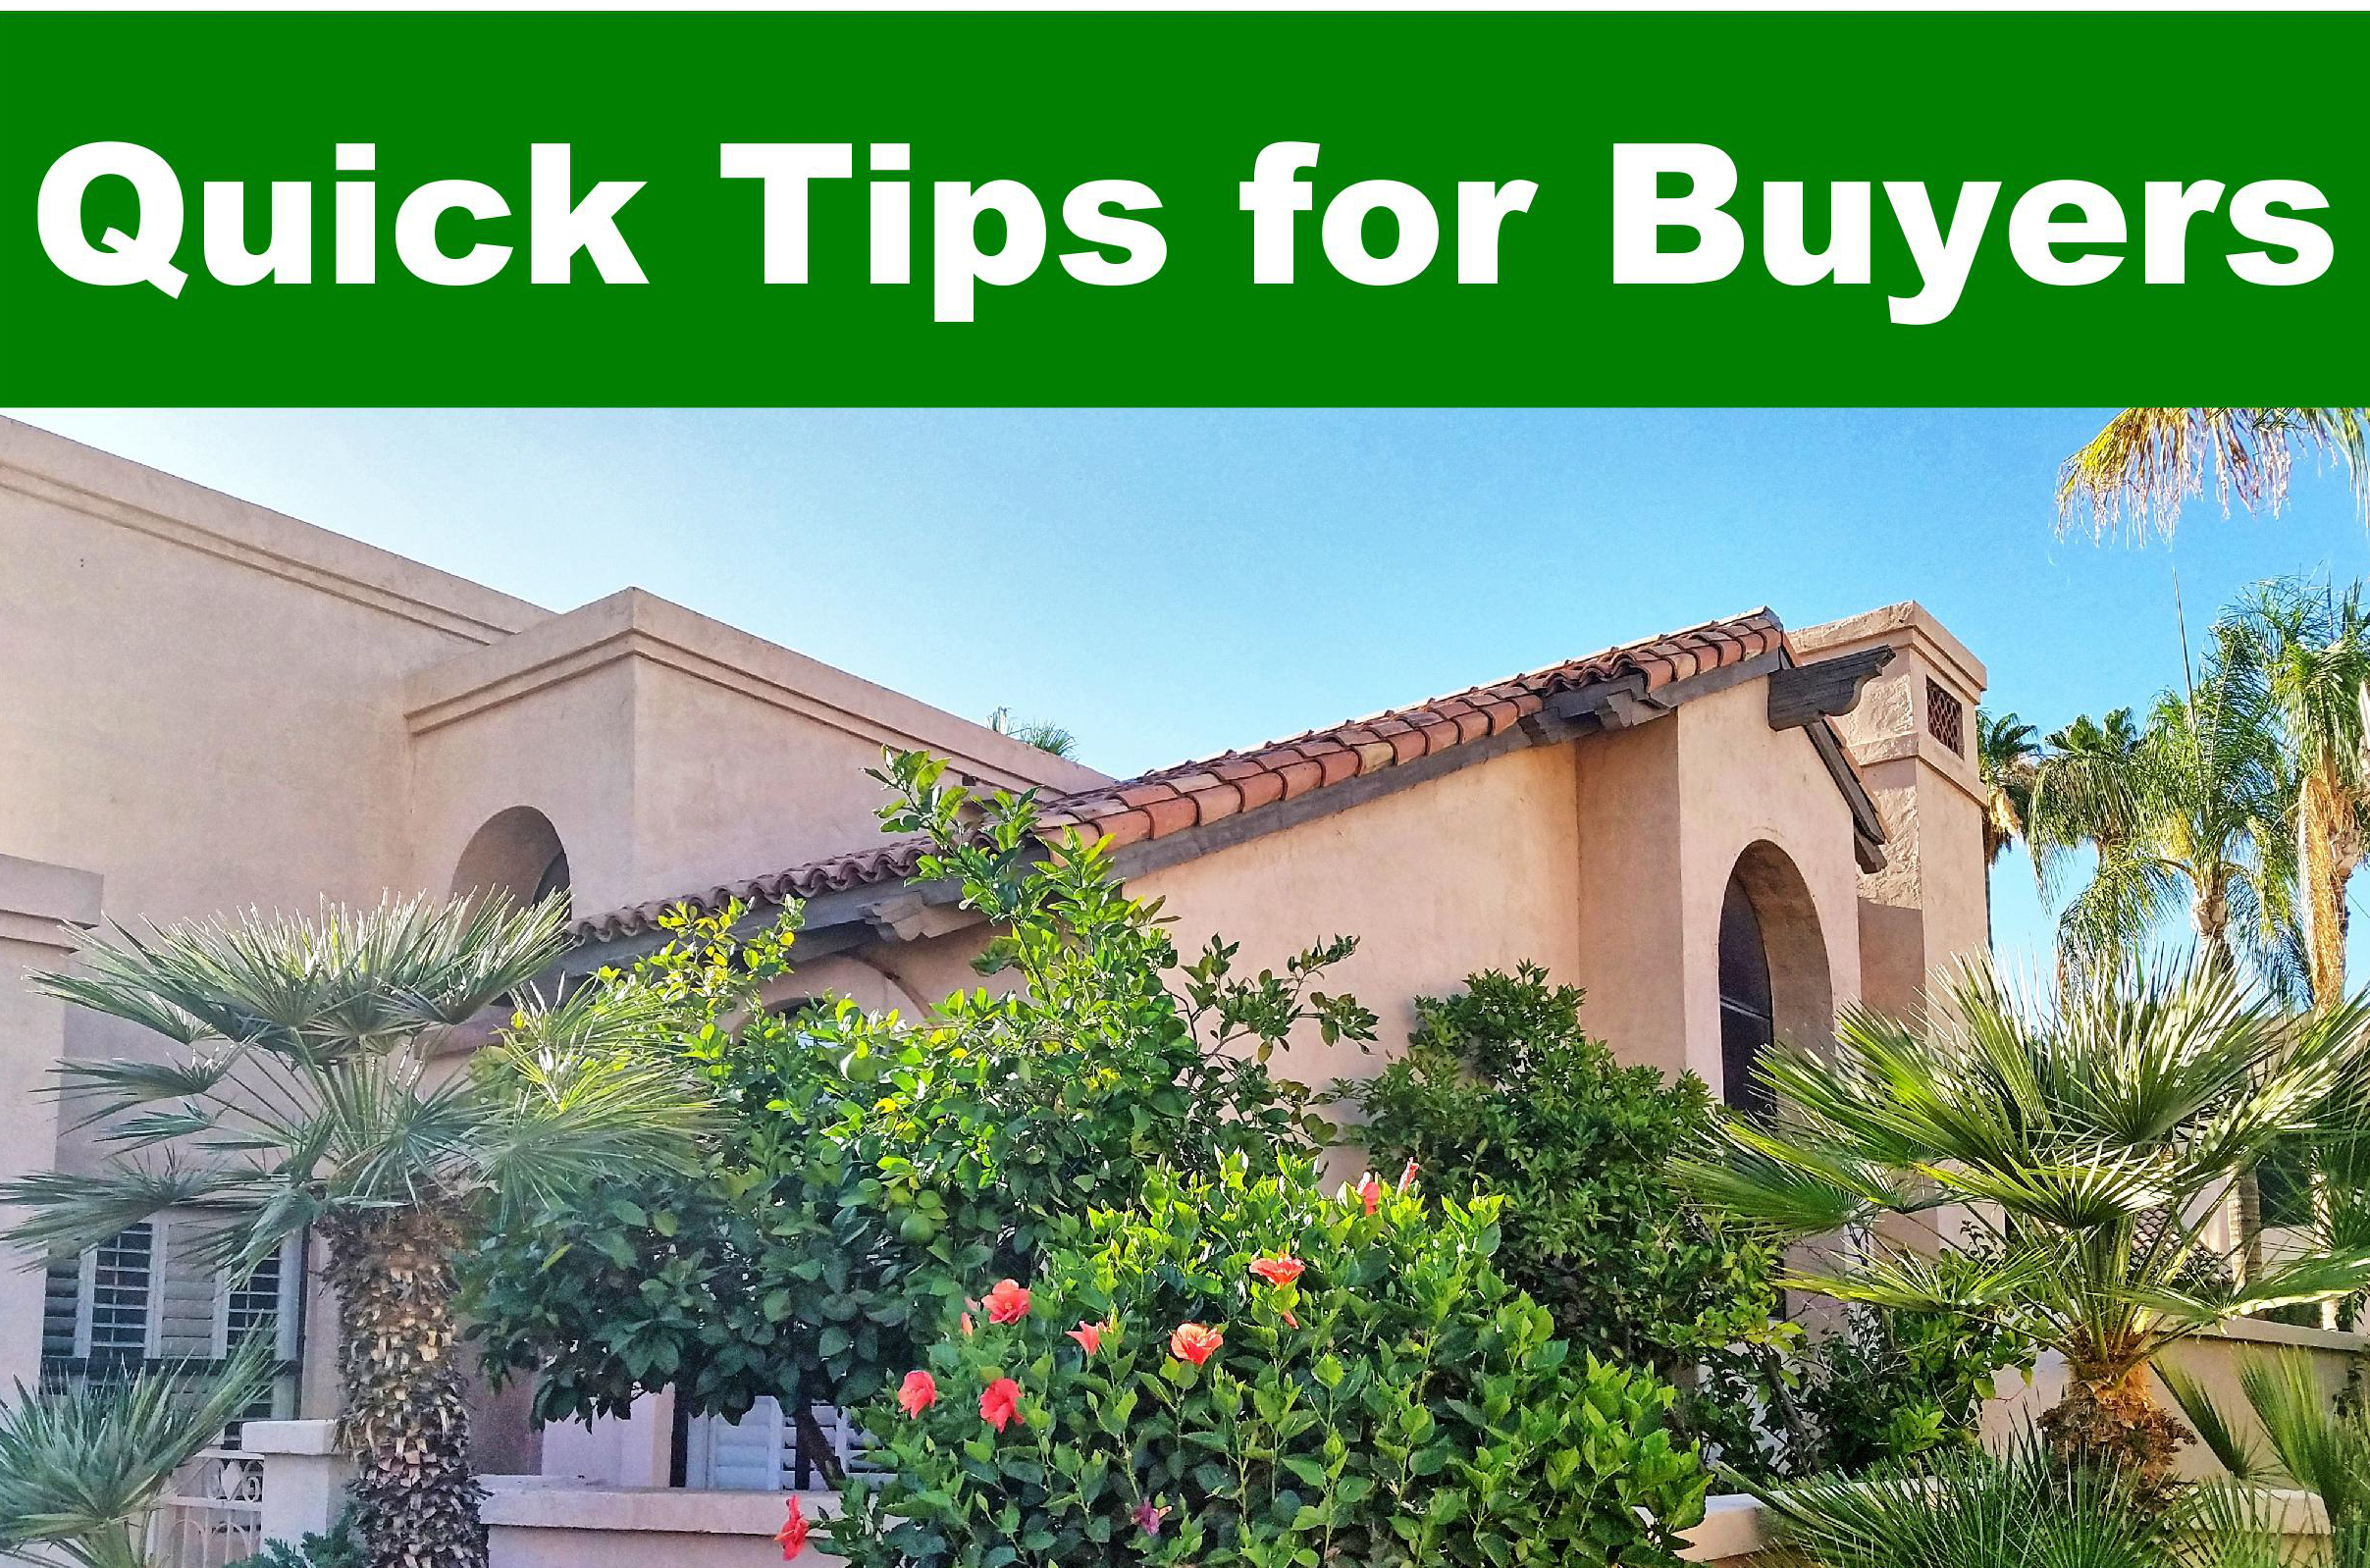 5 Tips for Buying a Home